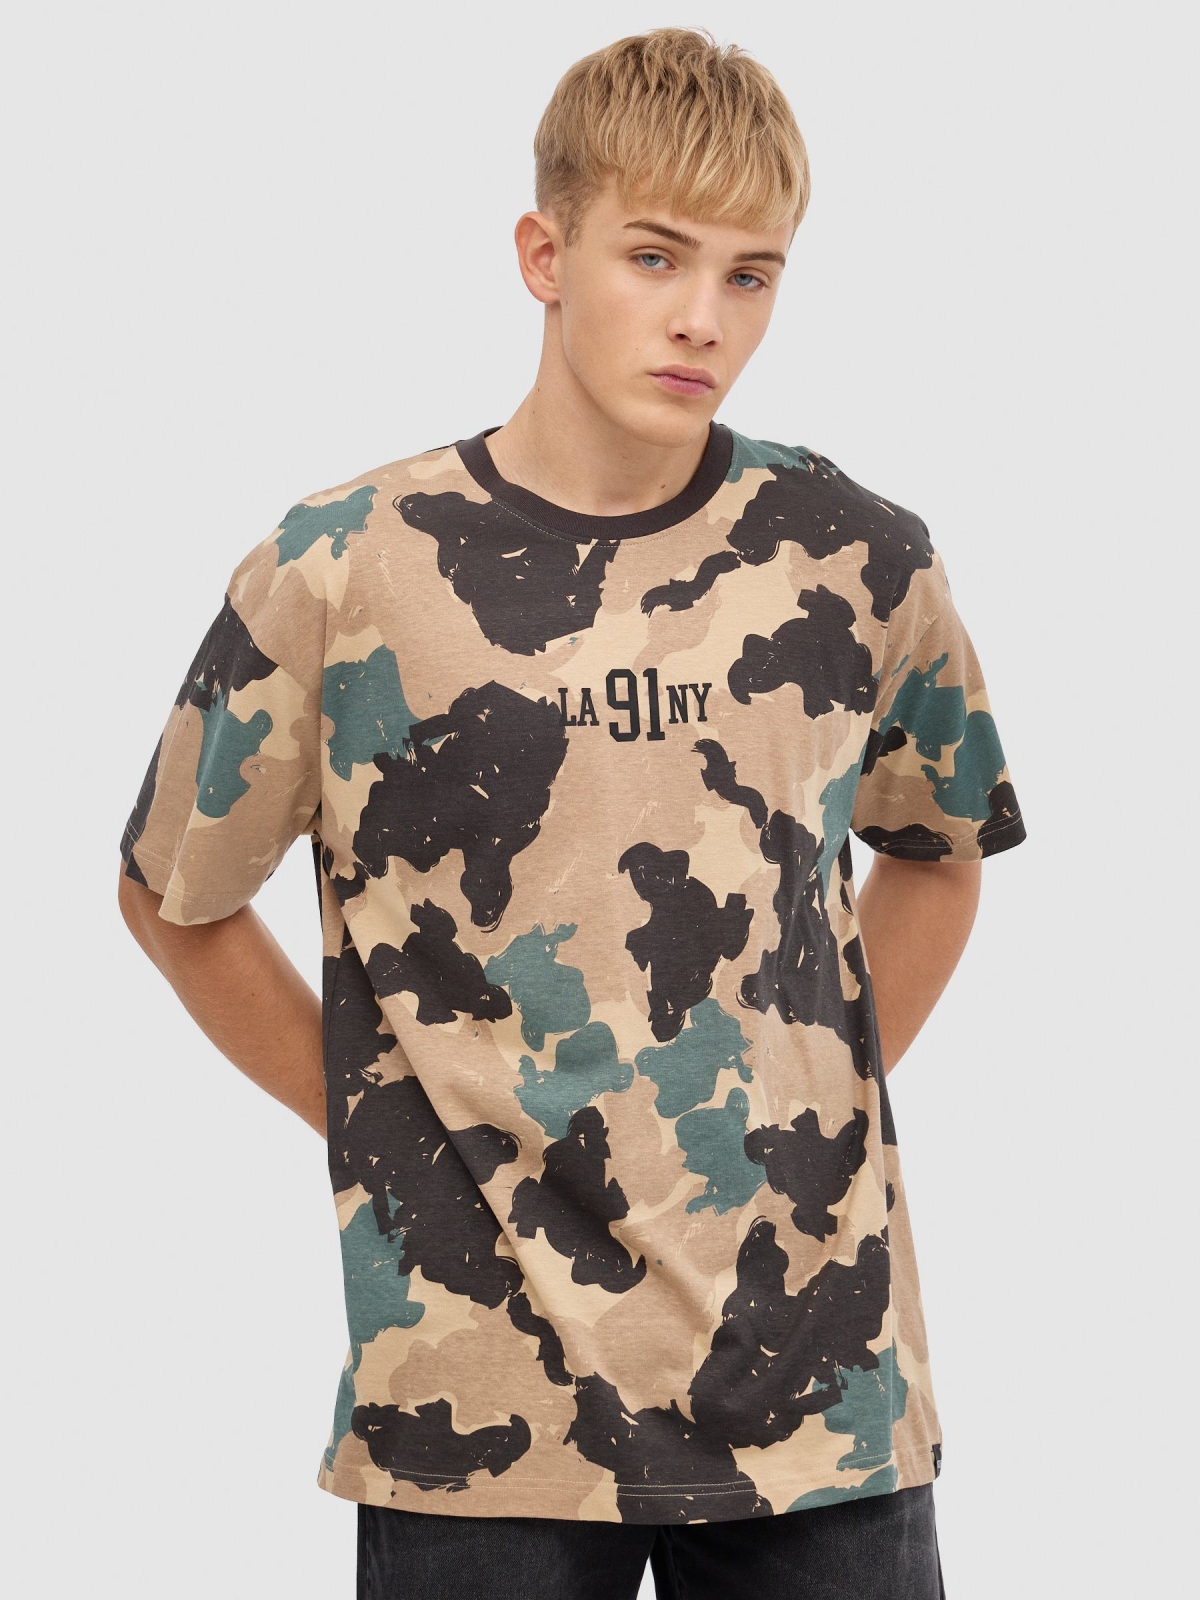 NY camouflage T-shirt sand middle front view